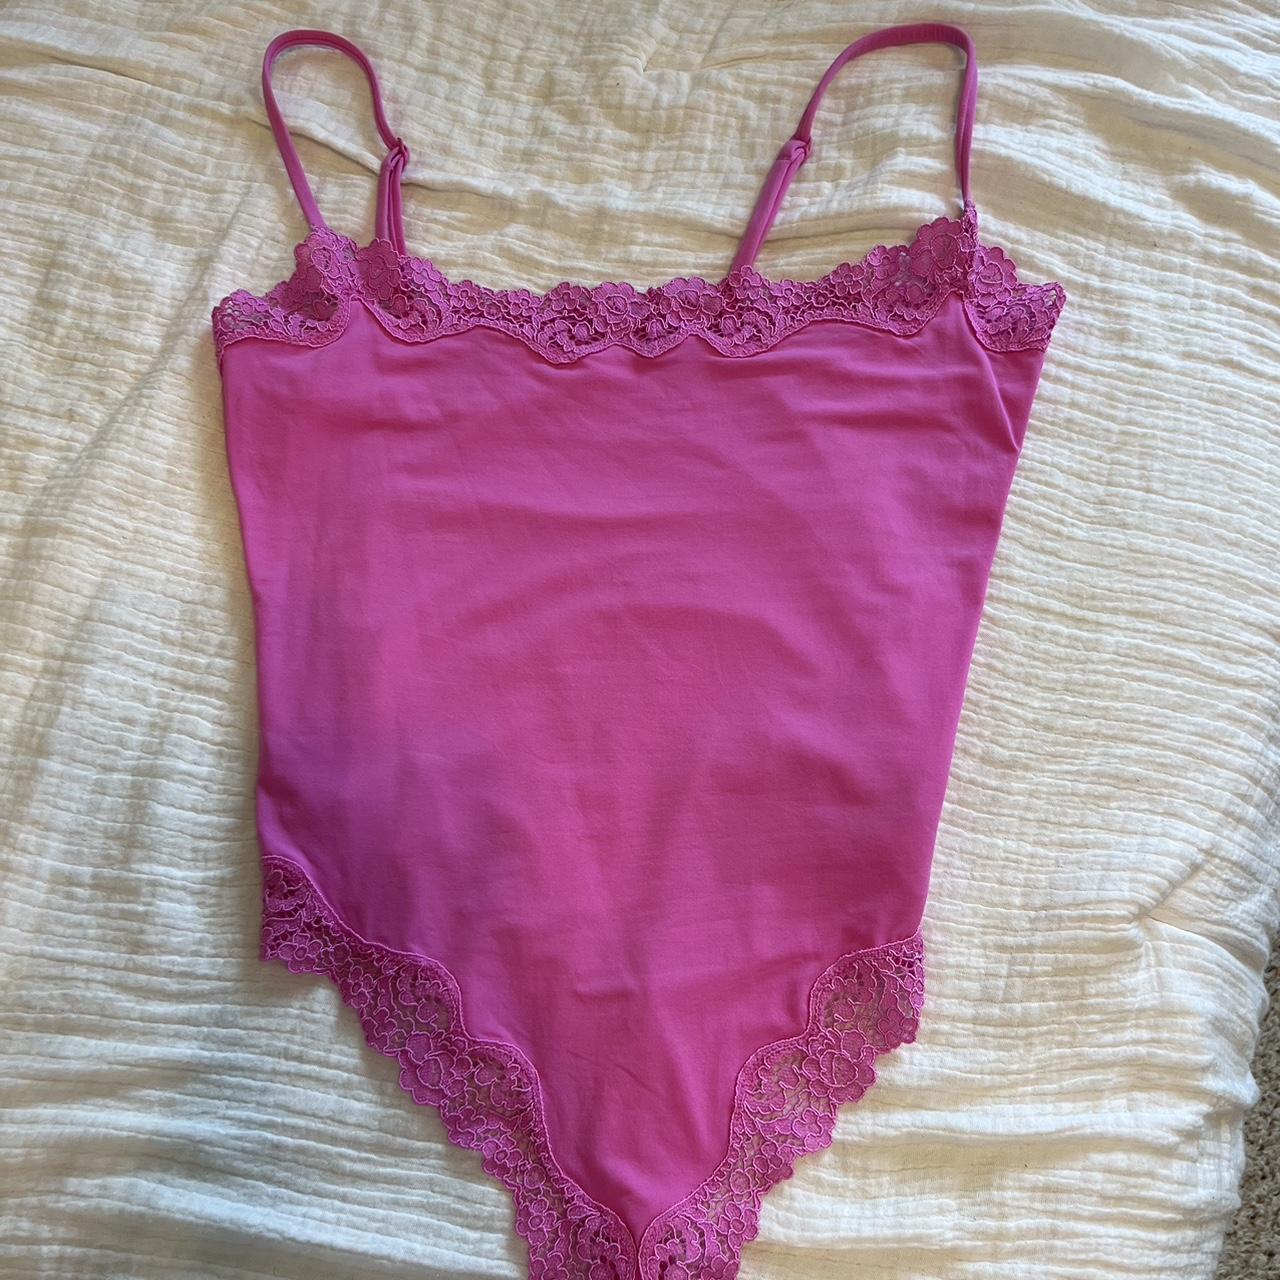 SKIMS hot pink body suit!! Worn one time! - Depop